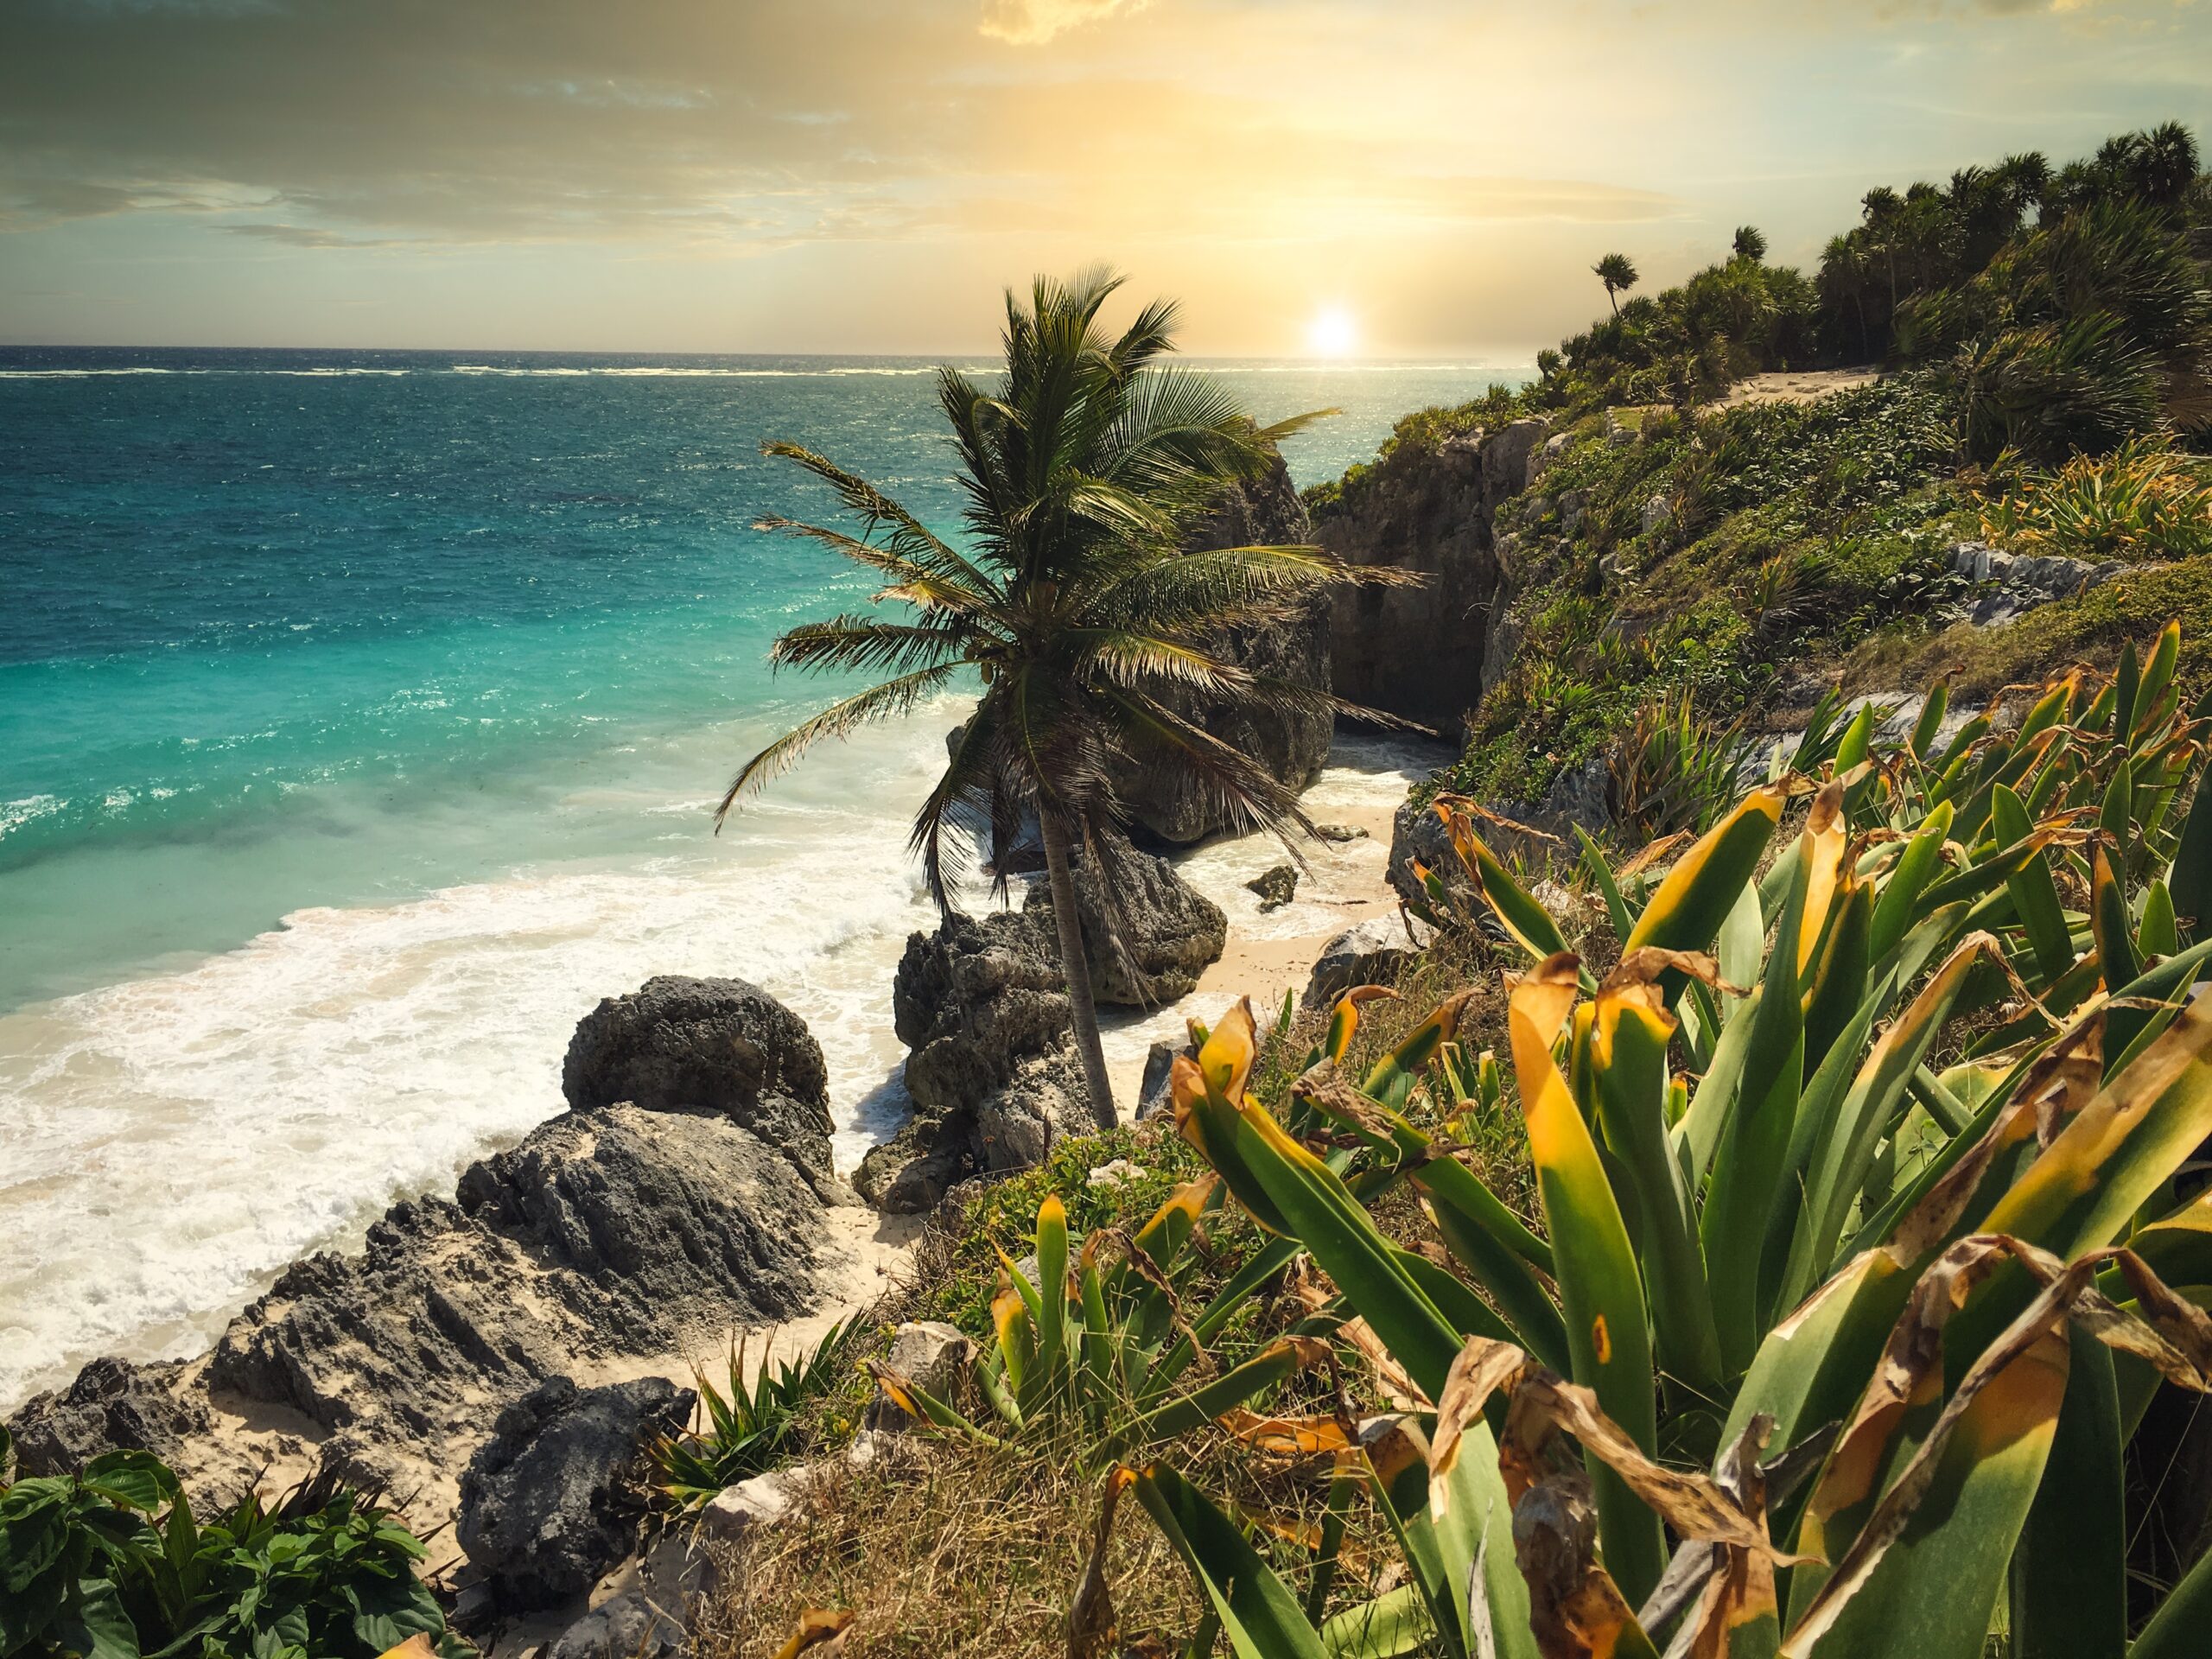 Tulum is  a safe Mexican destination that many travelers enjoy. 
Pictured: a lush beach in Tulum during sunset 